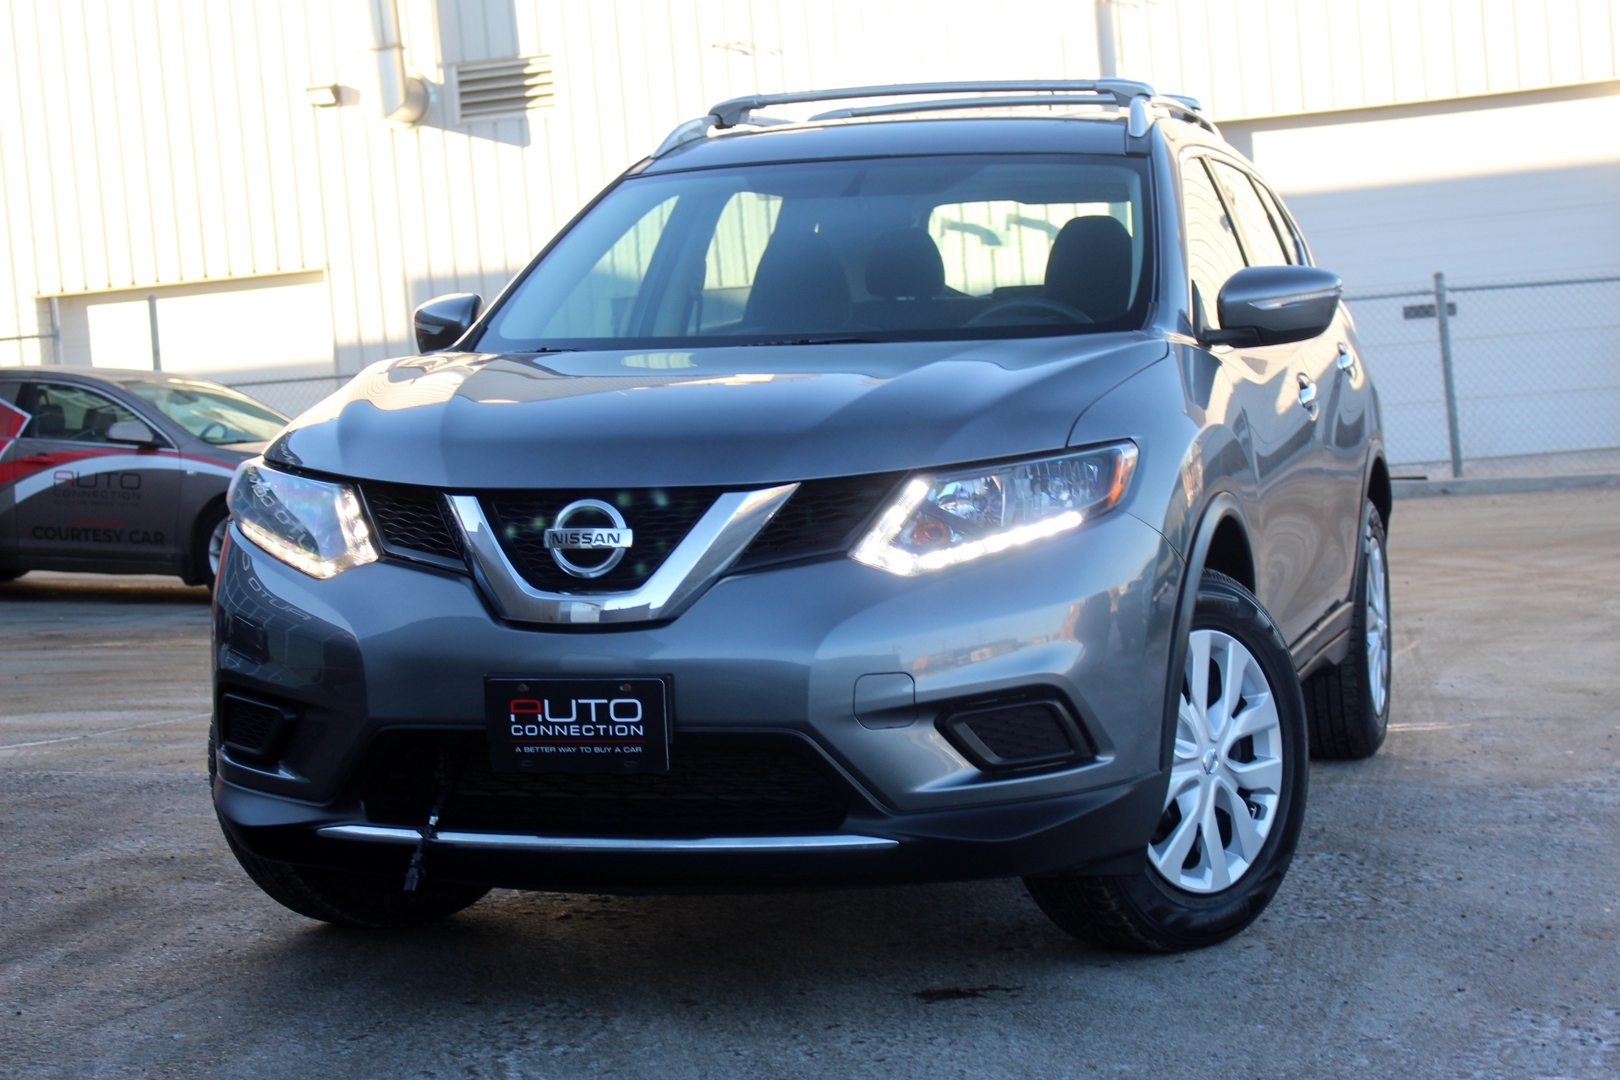 2015 Nissan Rogue S - AWD - LOW KMS - BLUETOOTH - REVERSE CAMERA - S